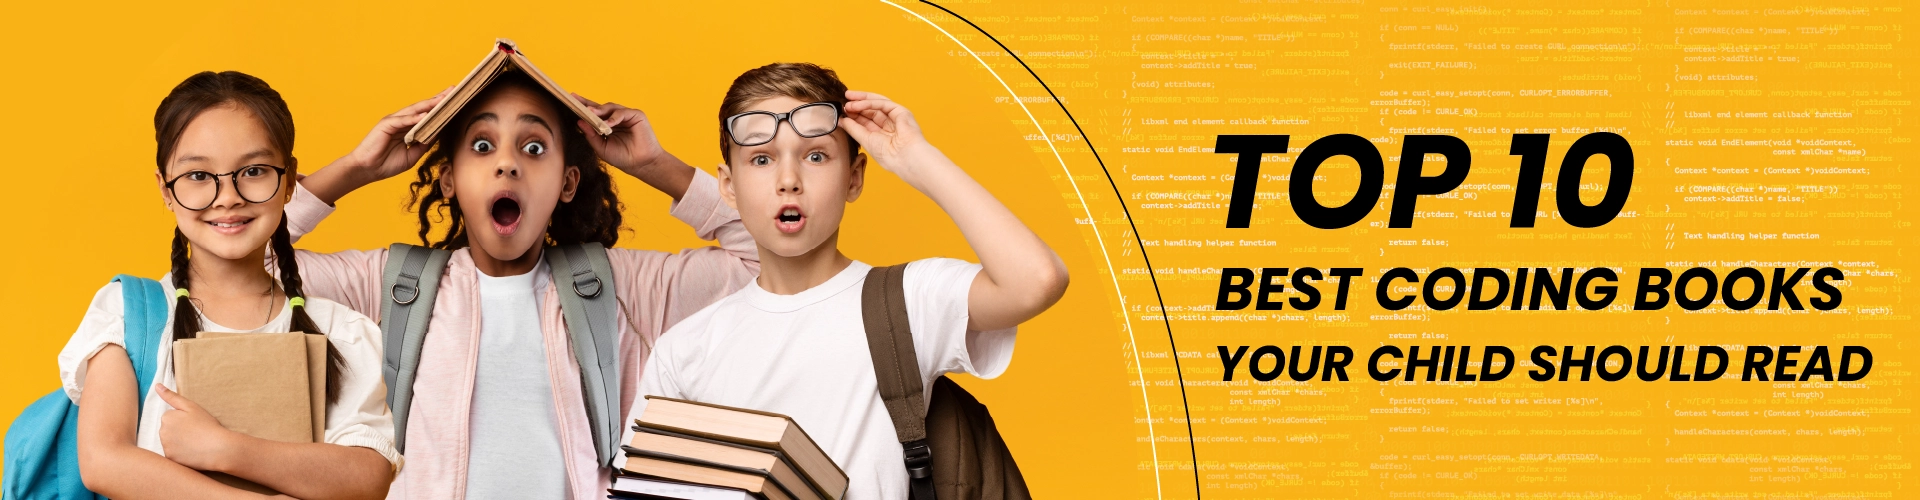 Coding Books Your Child Should Read